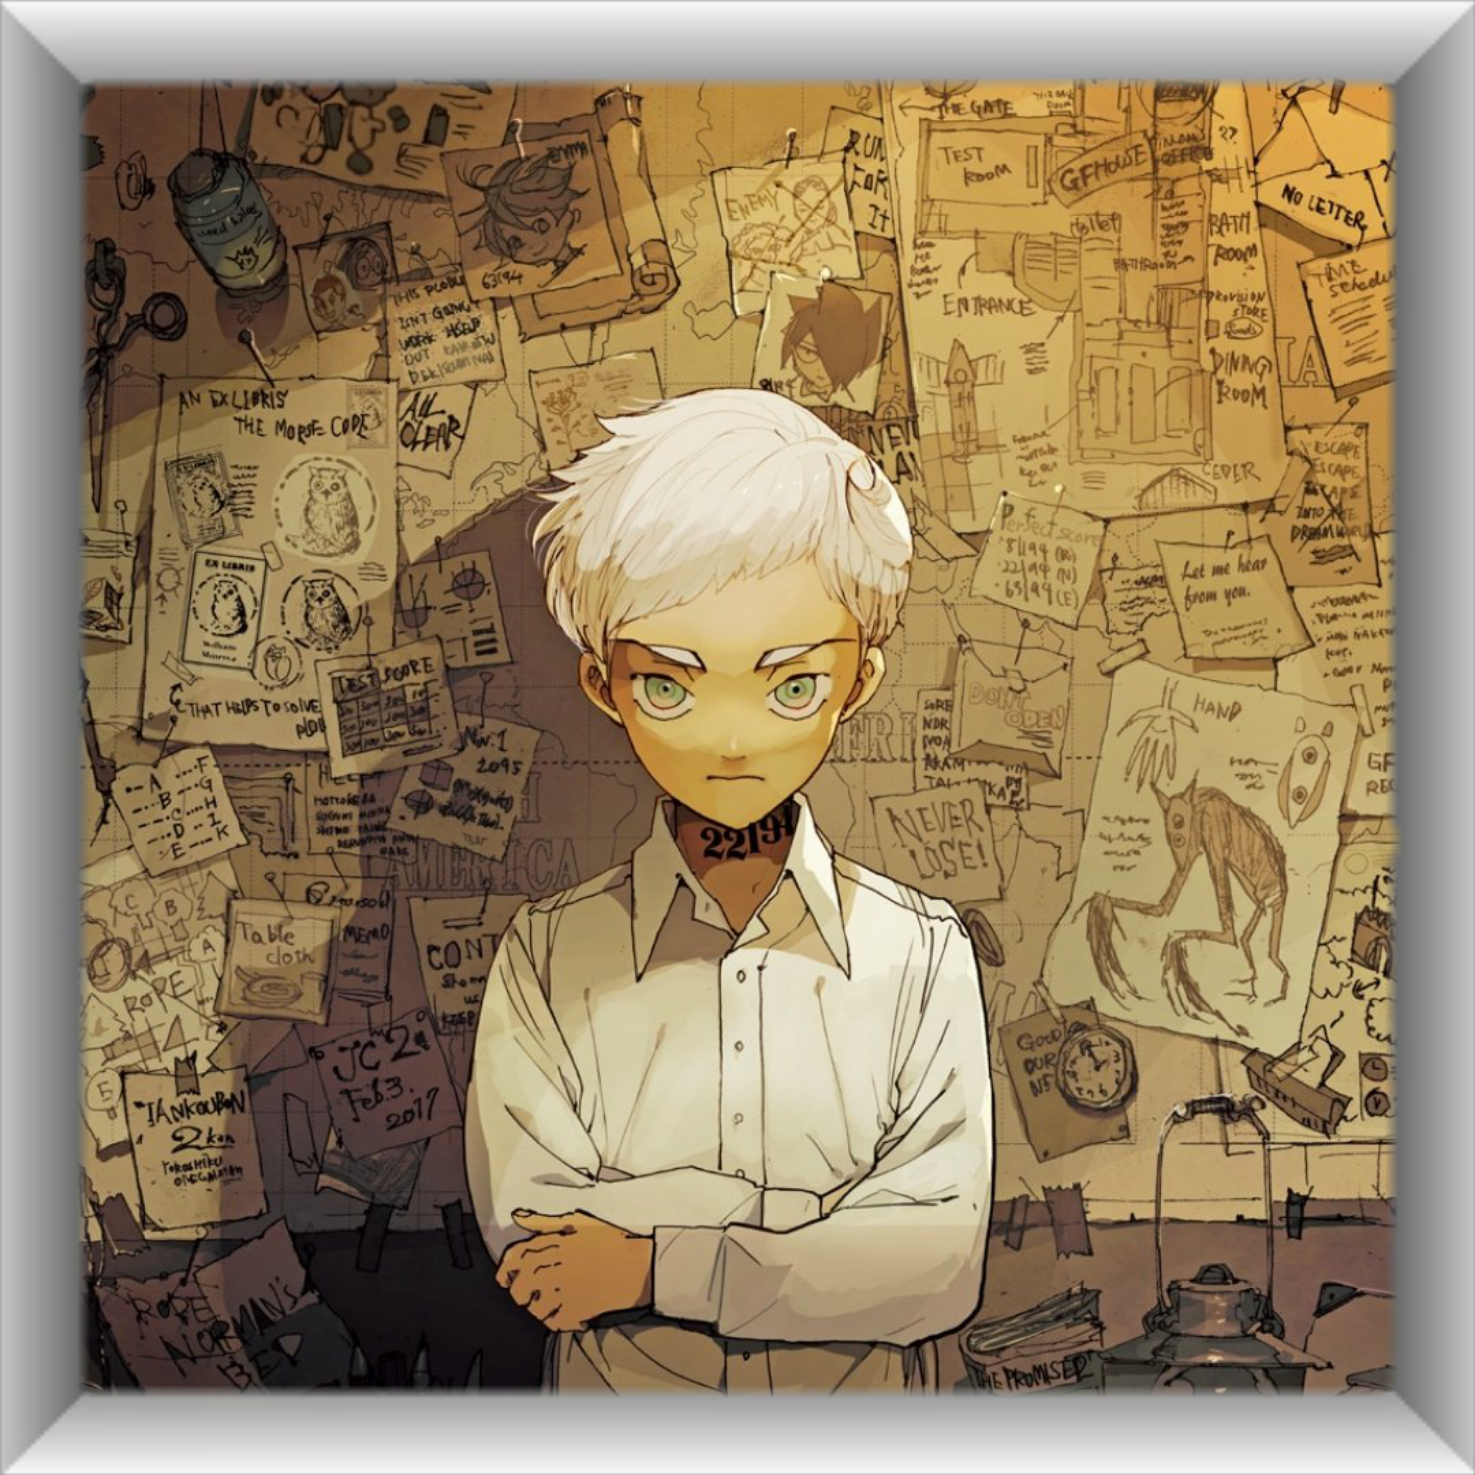 100+] The Promised Neverland Norman Wallpapers